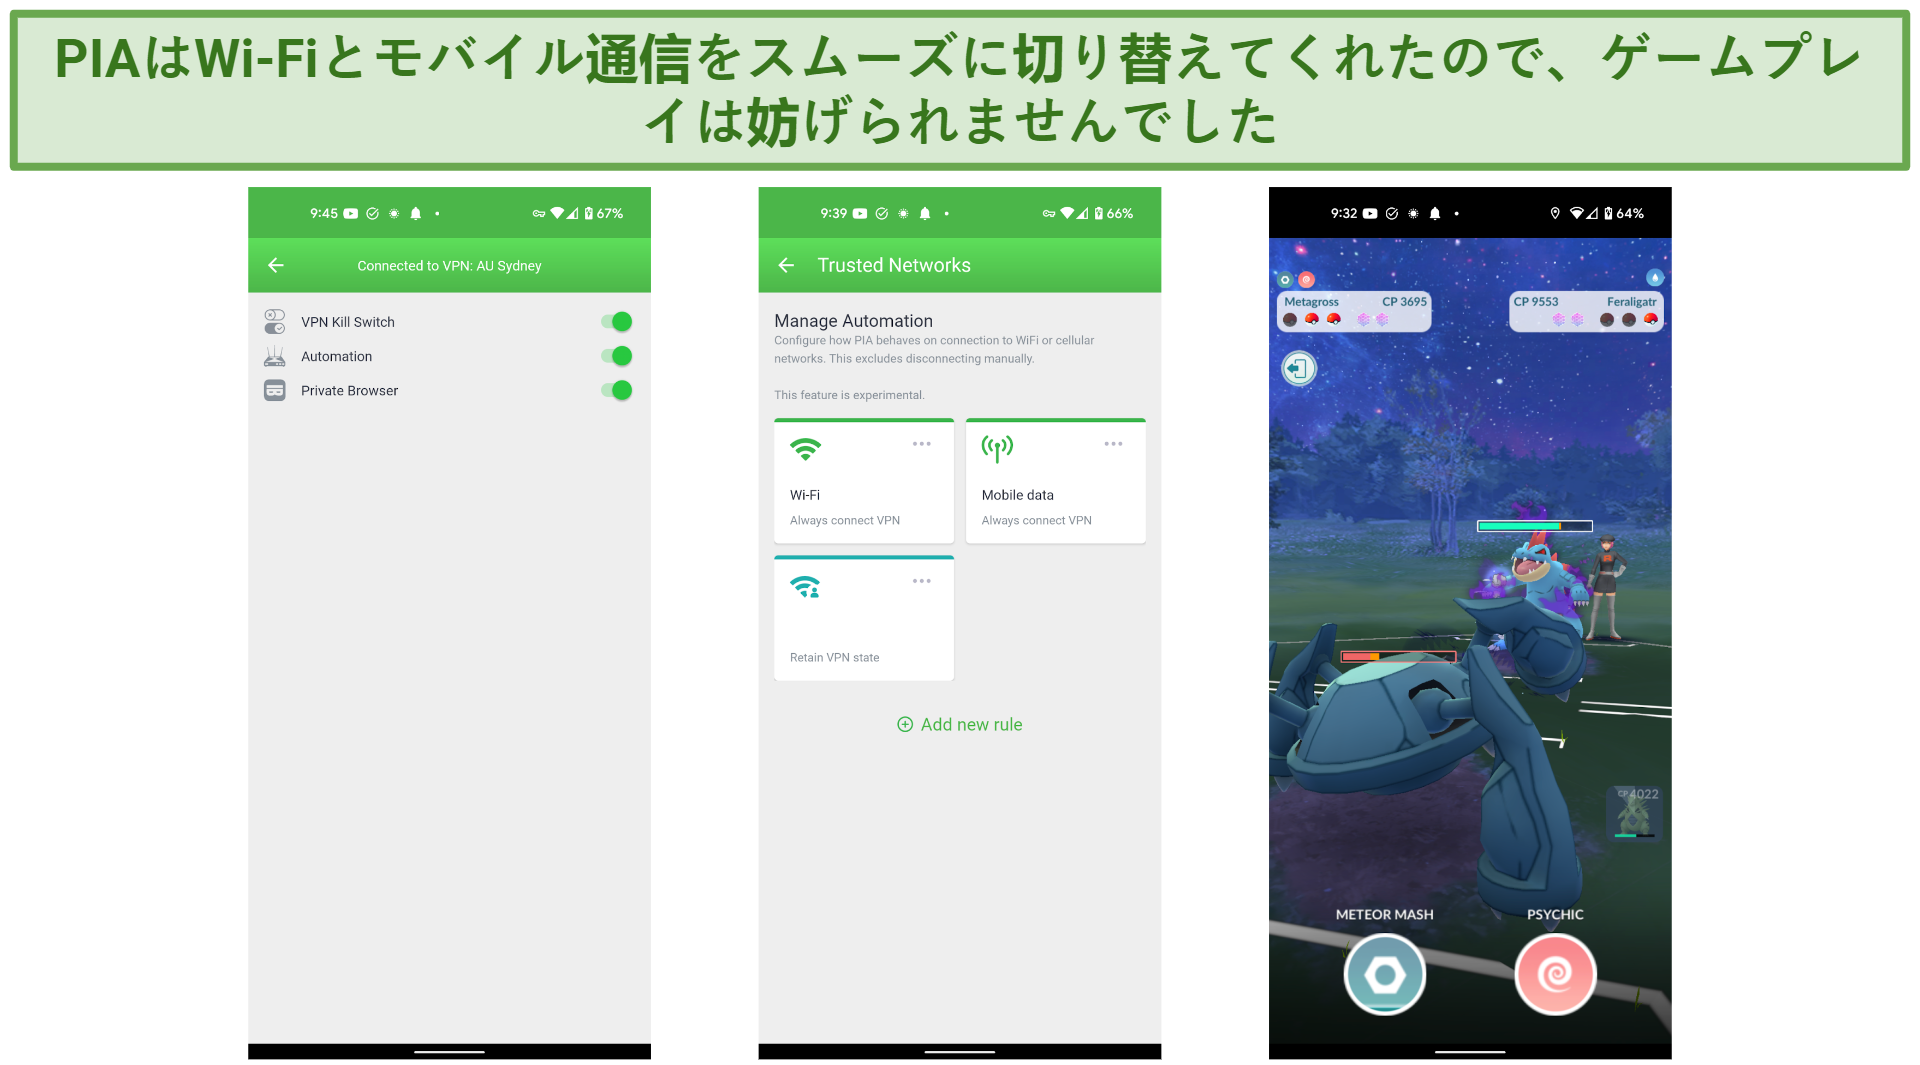 Screenshots of an Android with the PIA app and its security features and network automation screens, and playing Pokémon GO